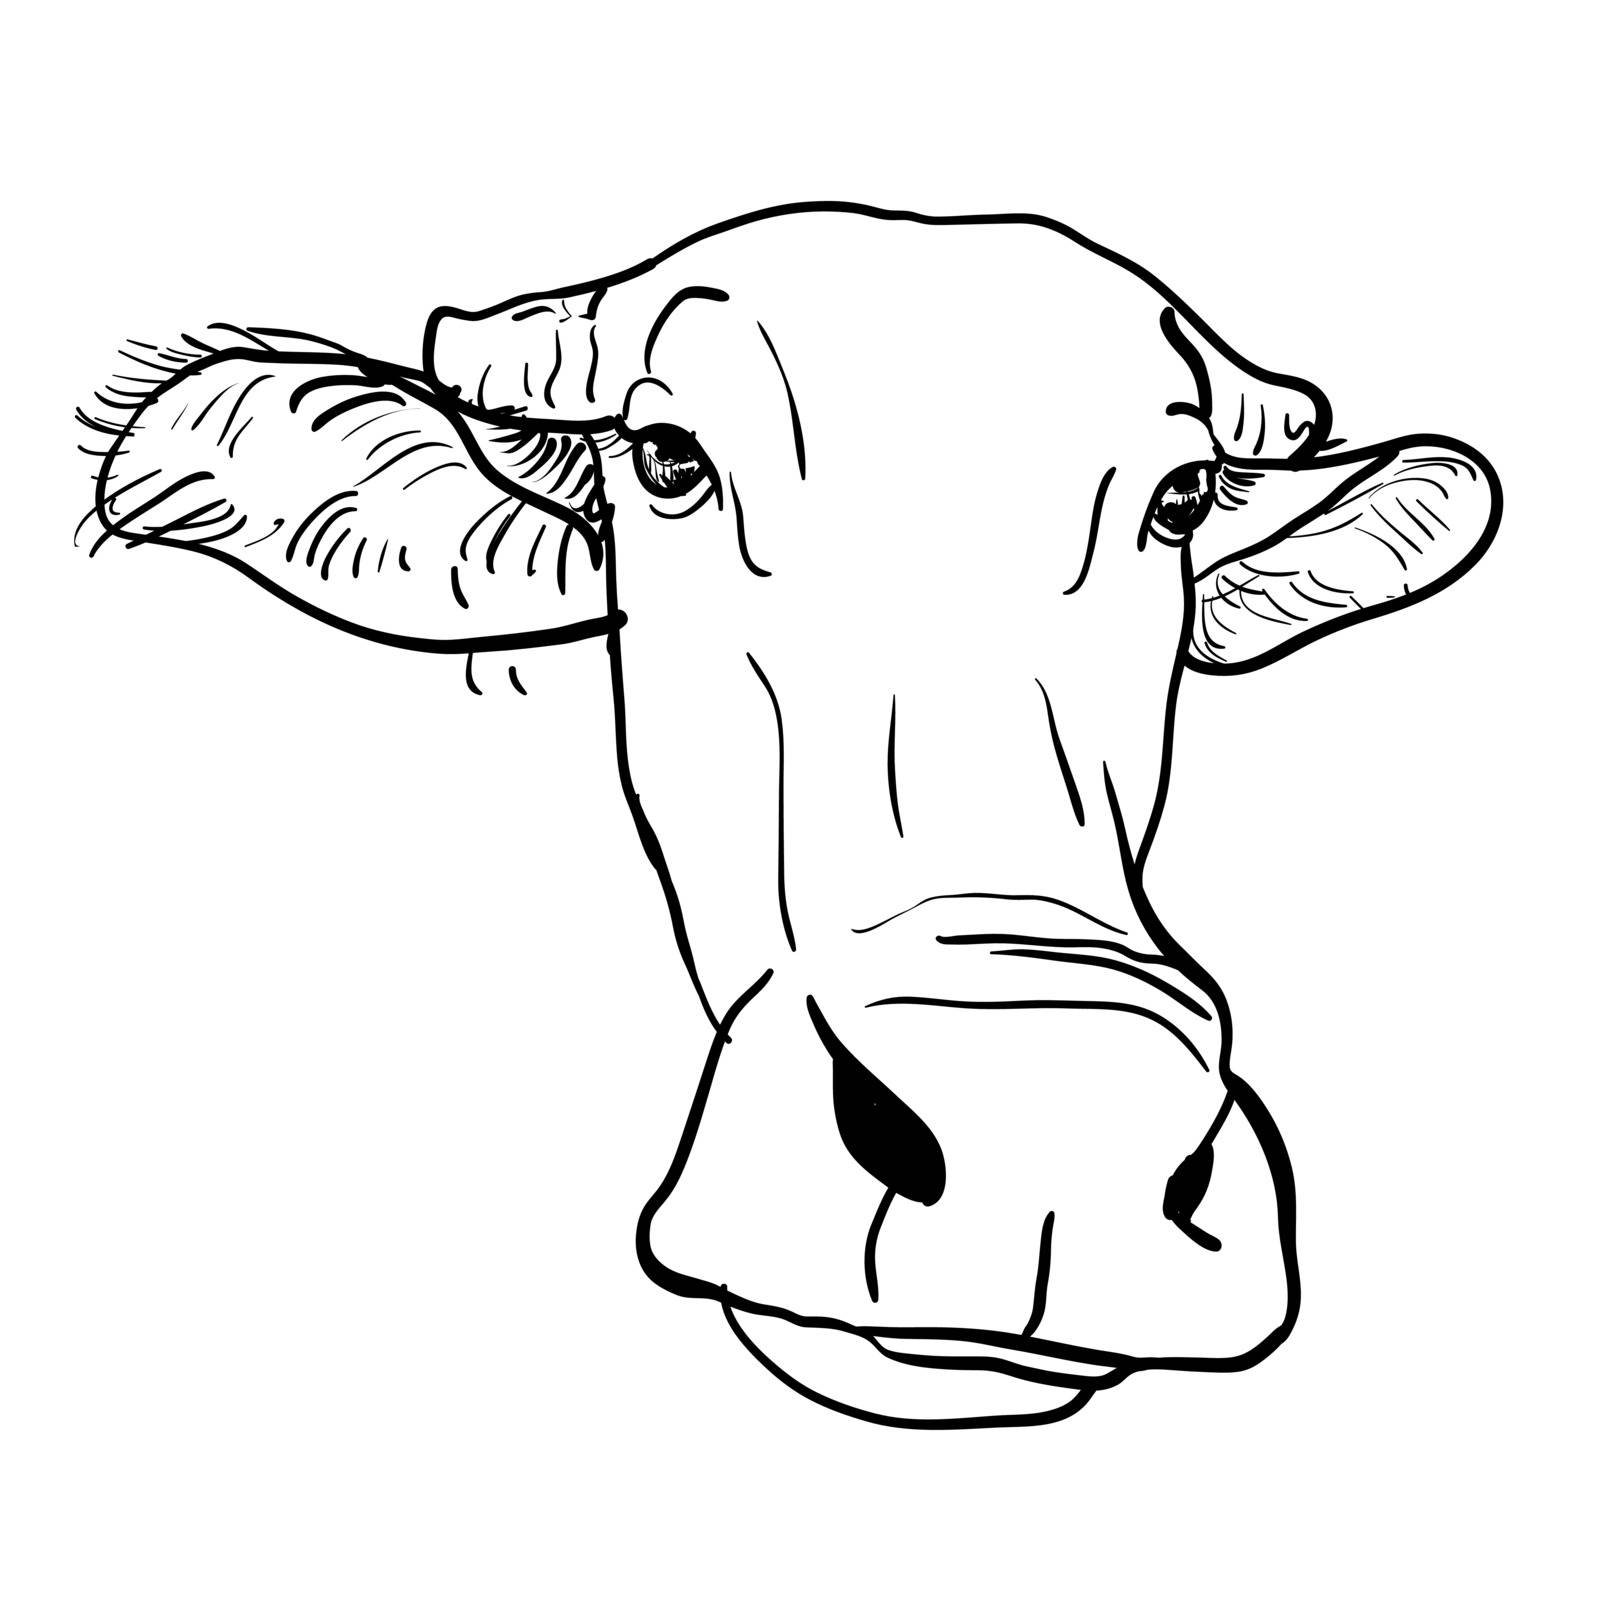 Drawing of buffalo head on white background